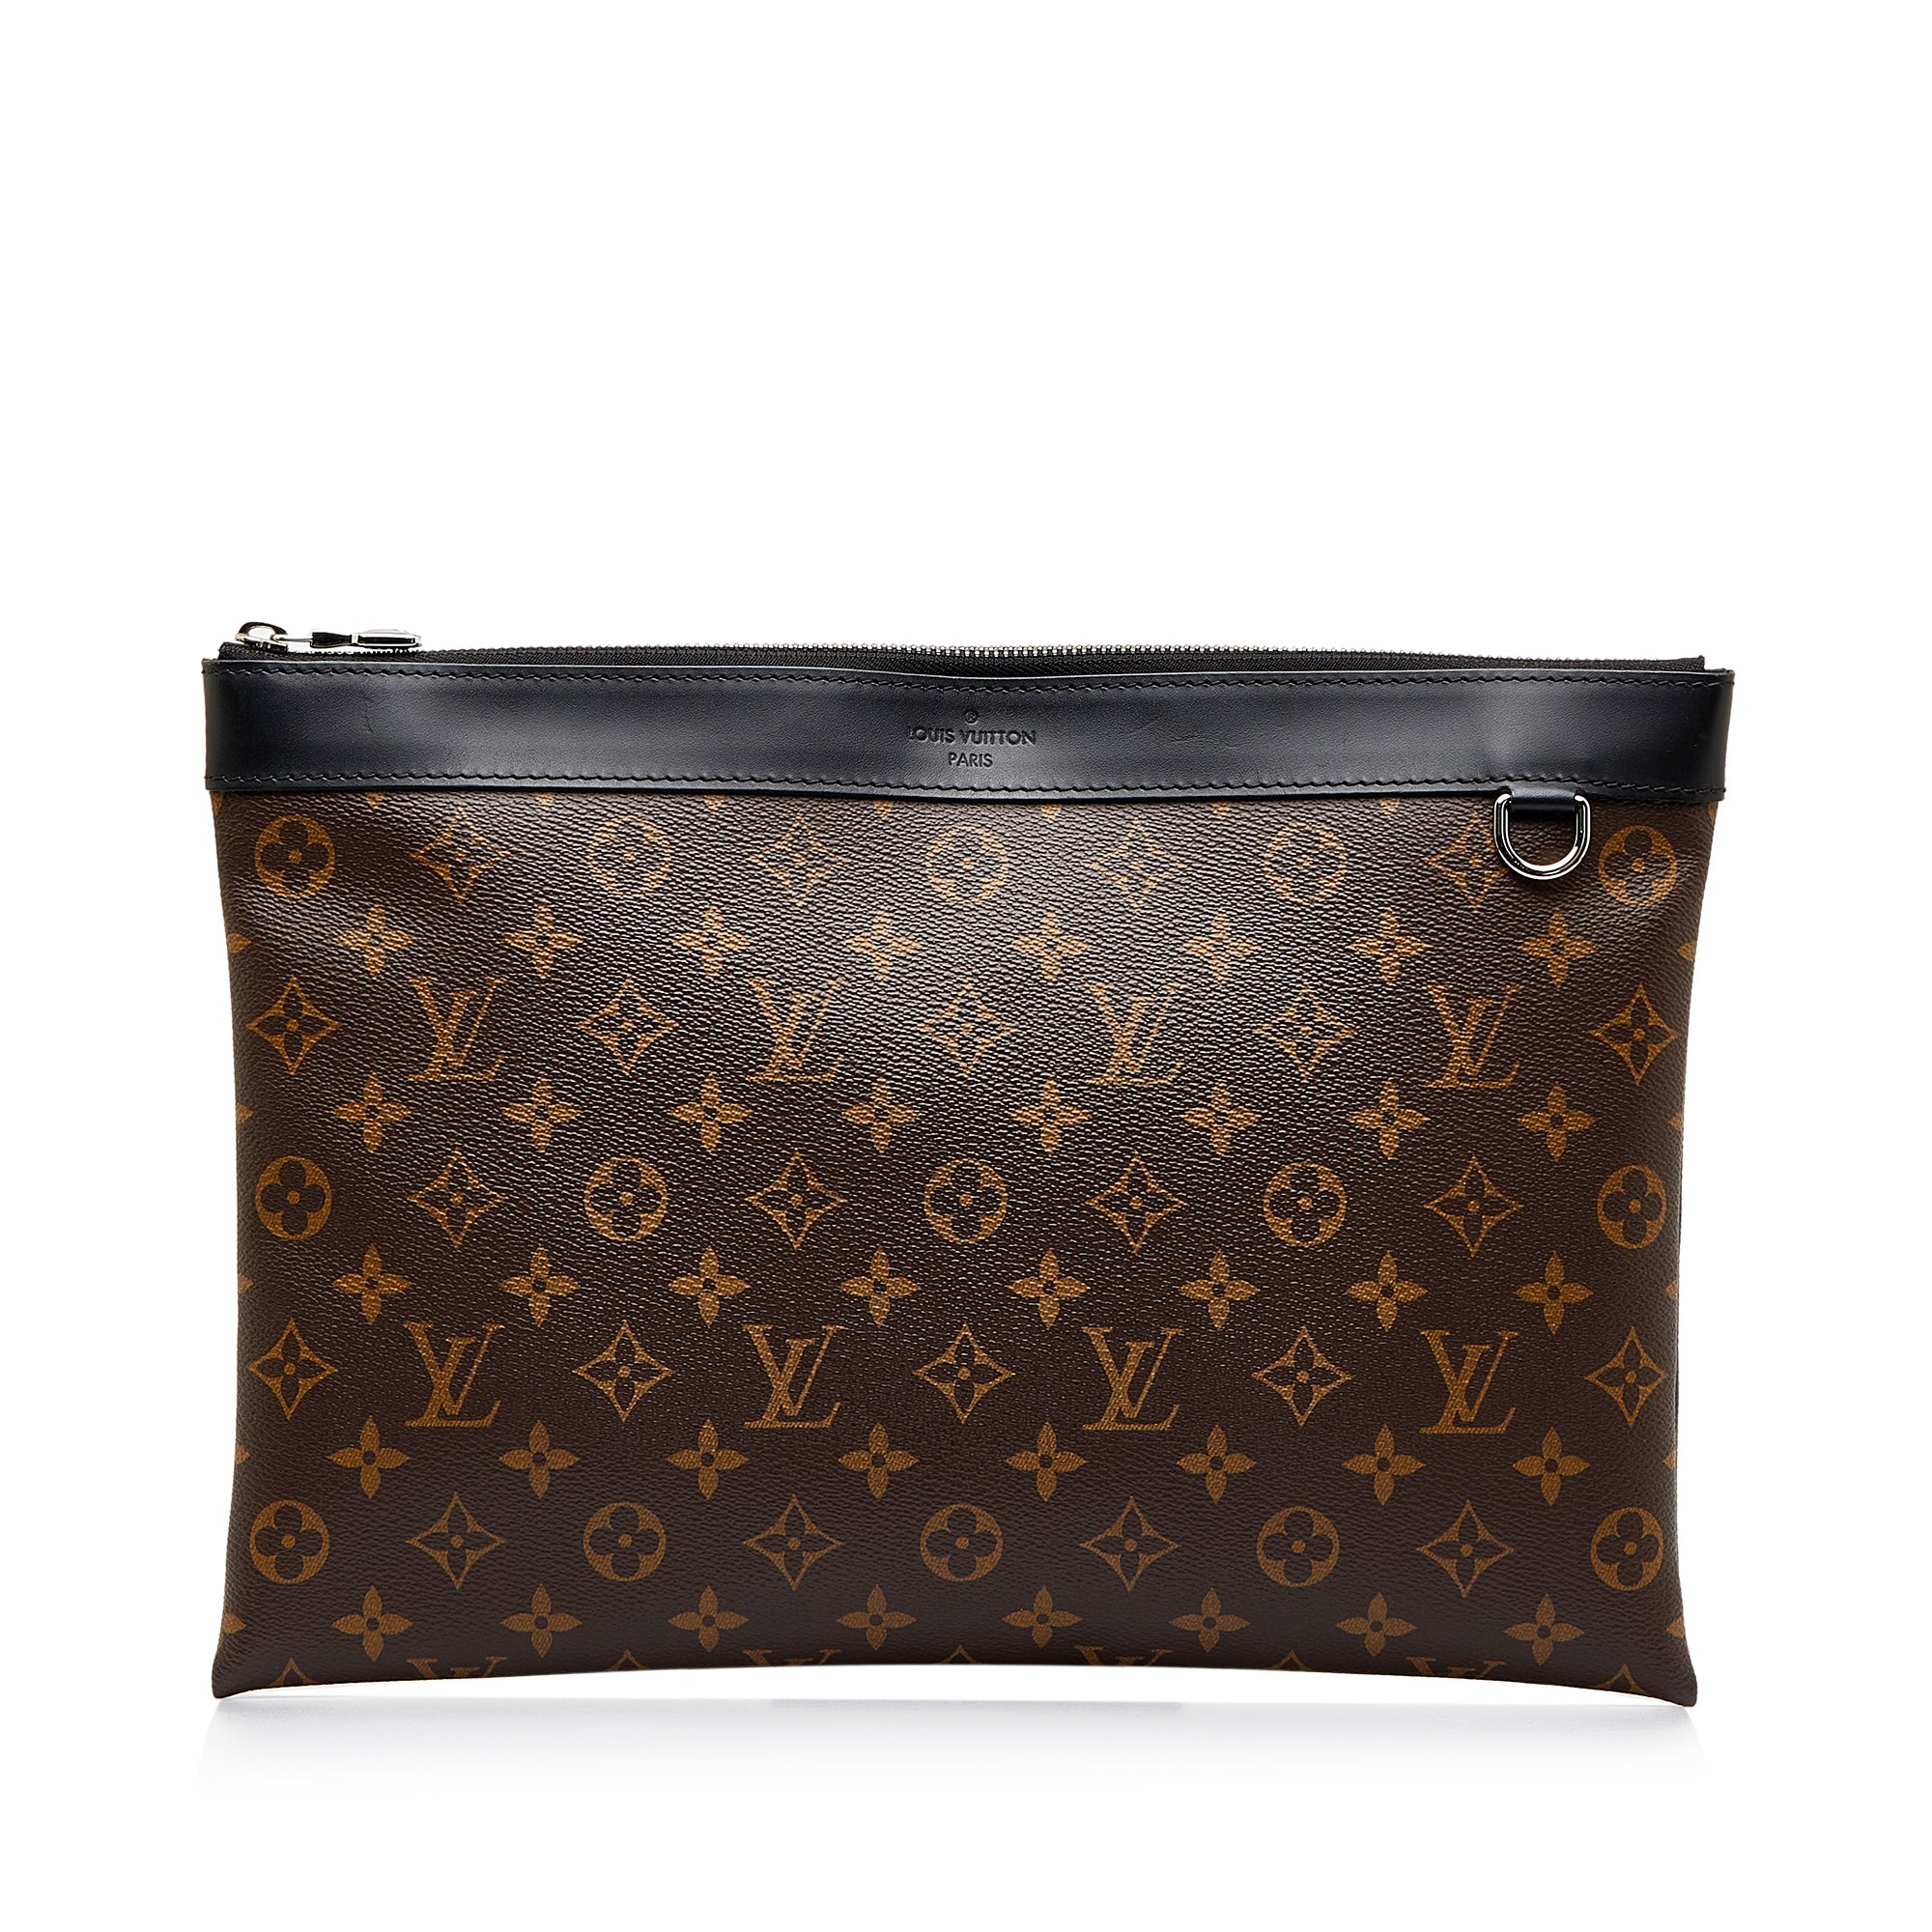 Louis Vuitton - Authenticated Key Pouch Small Bag - Leather Brown Plain for Men, Very Good Condition